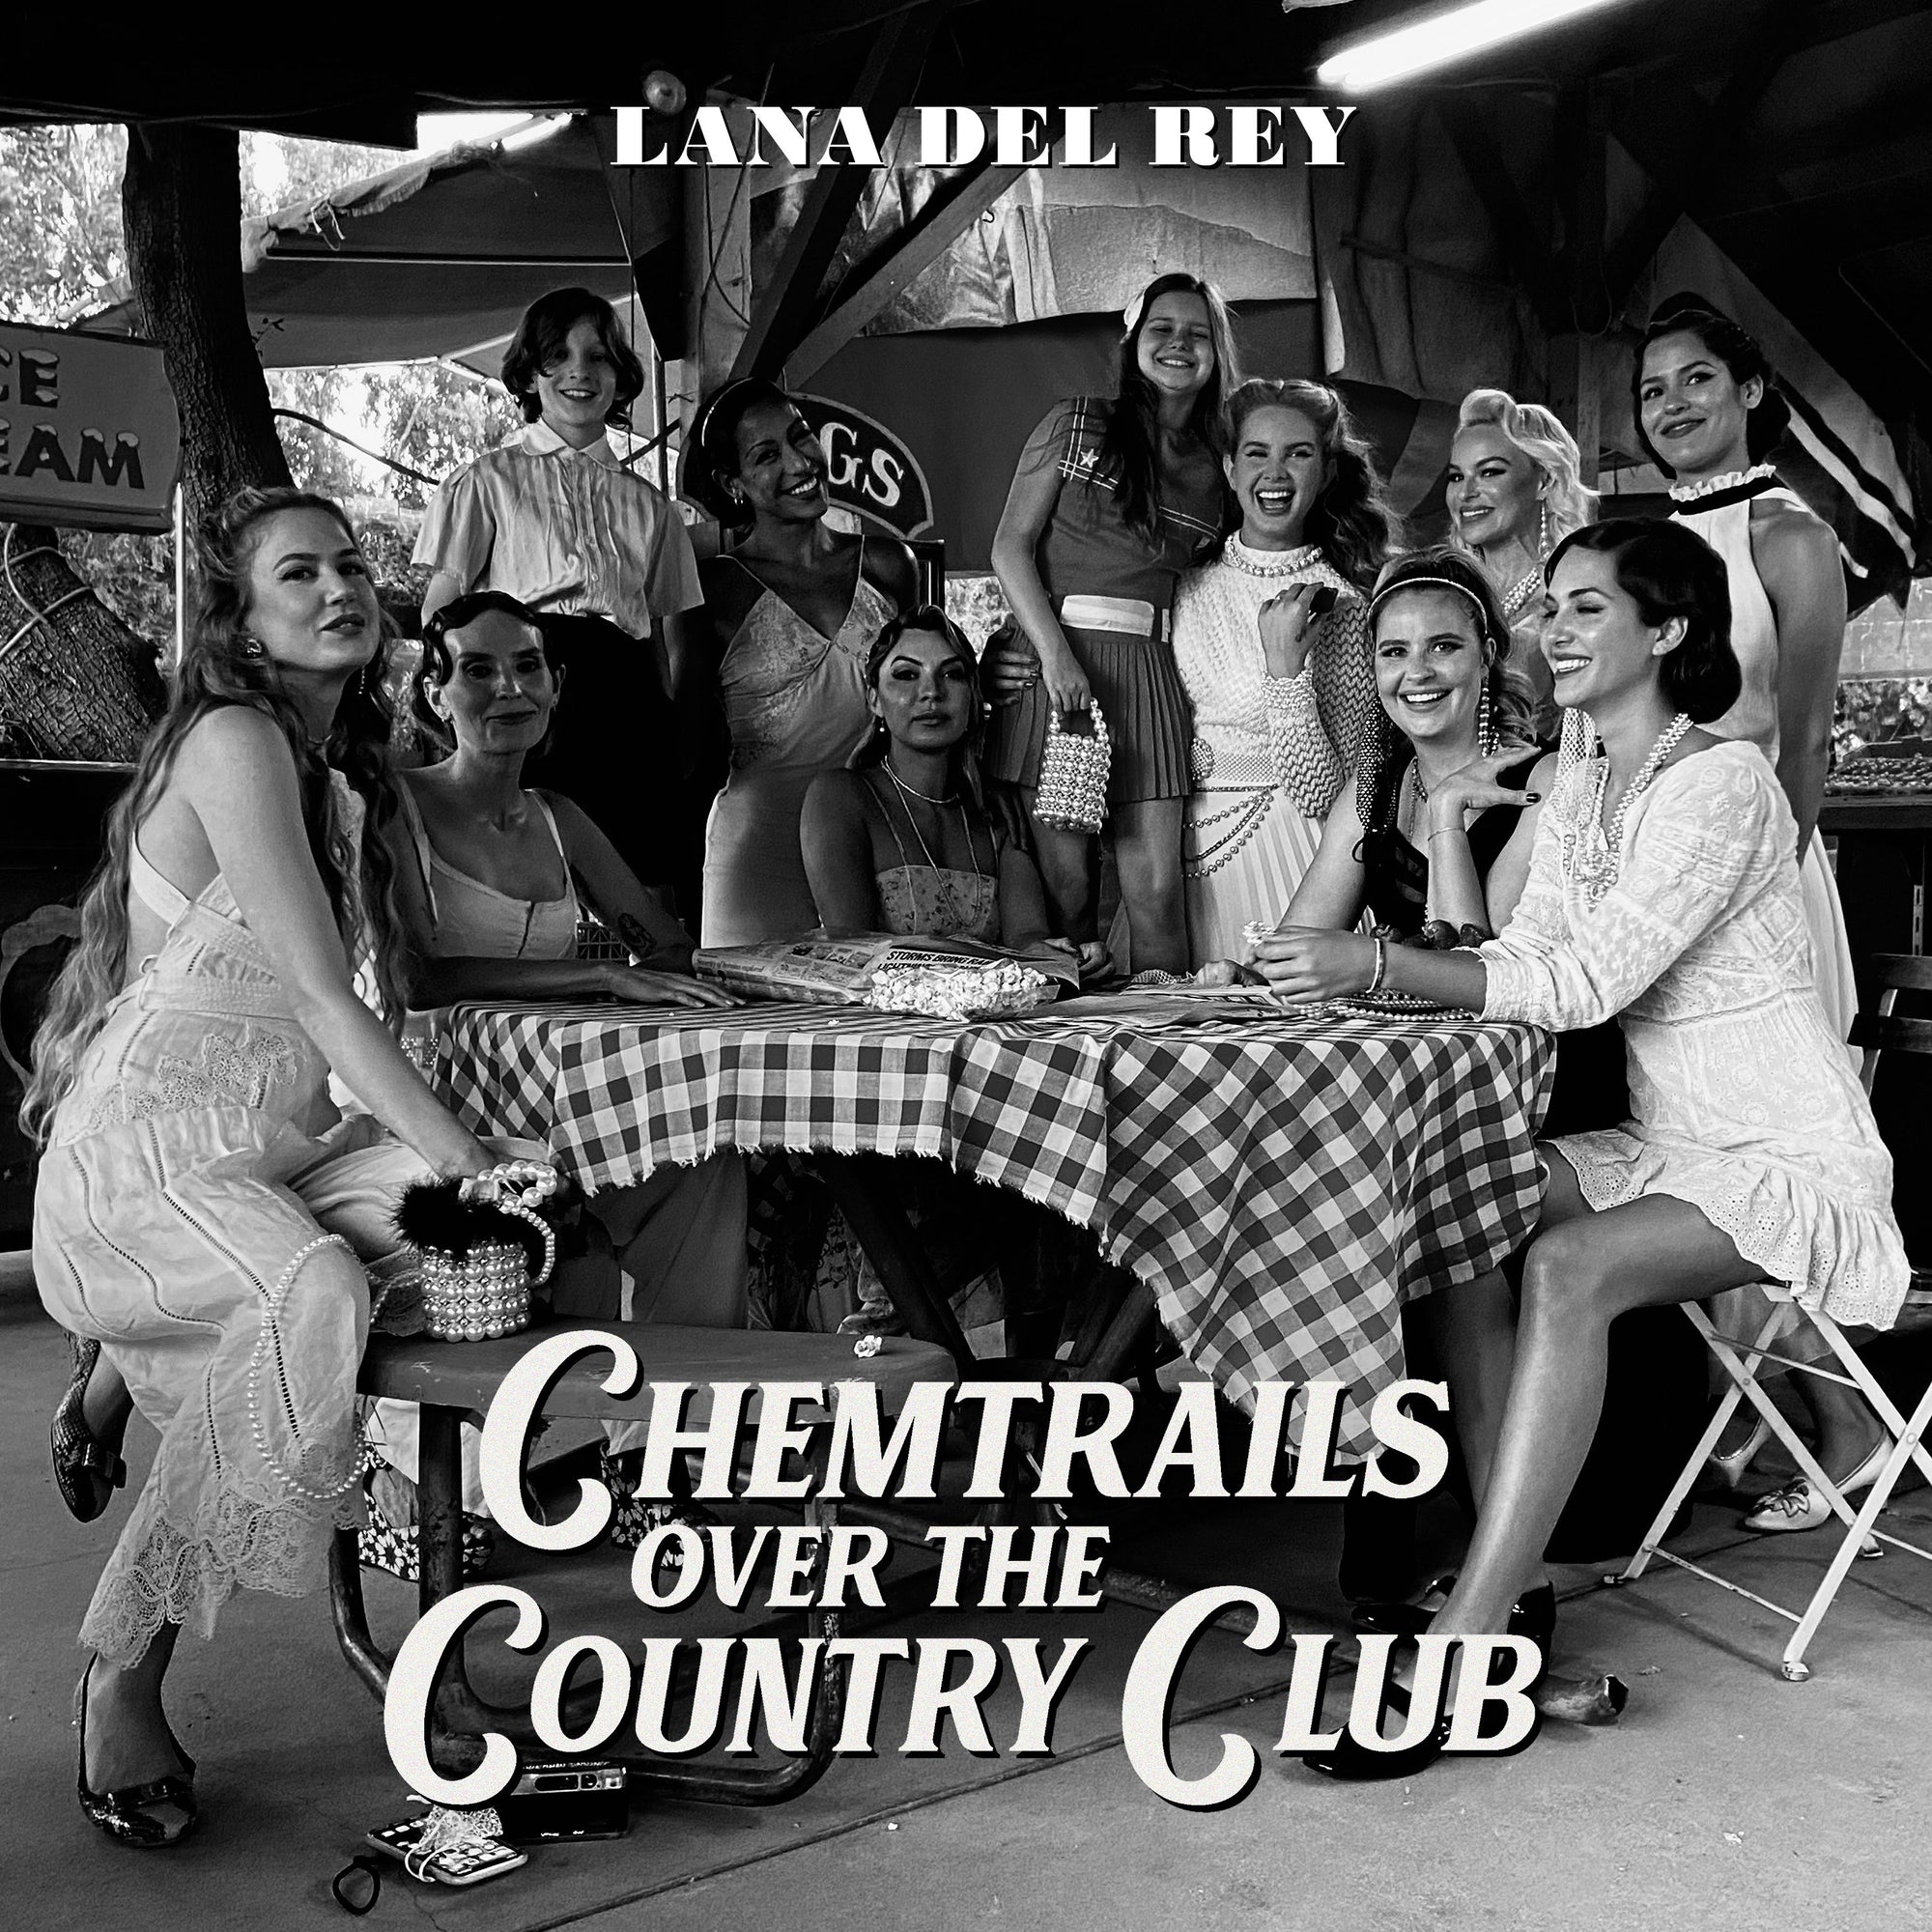 Lana Del Rey - Chemtrails Over The Country Club (Vinyl LP)